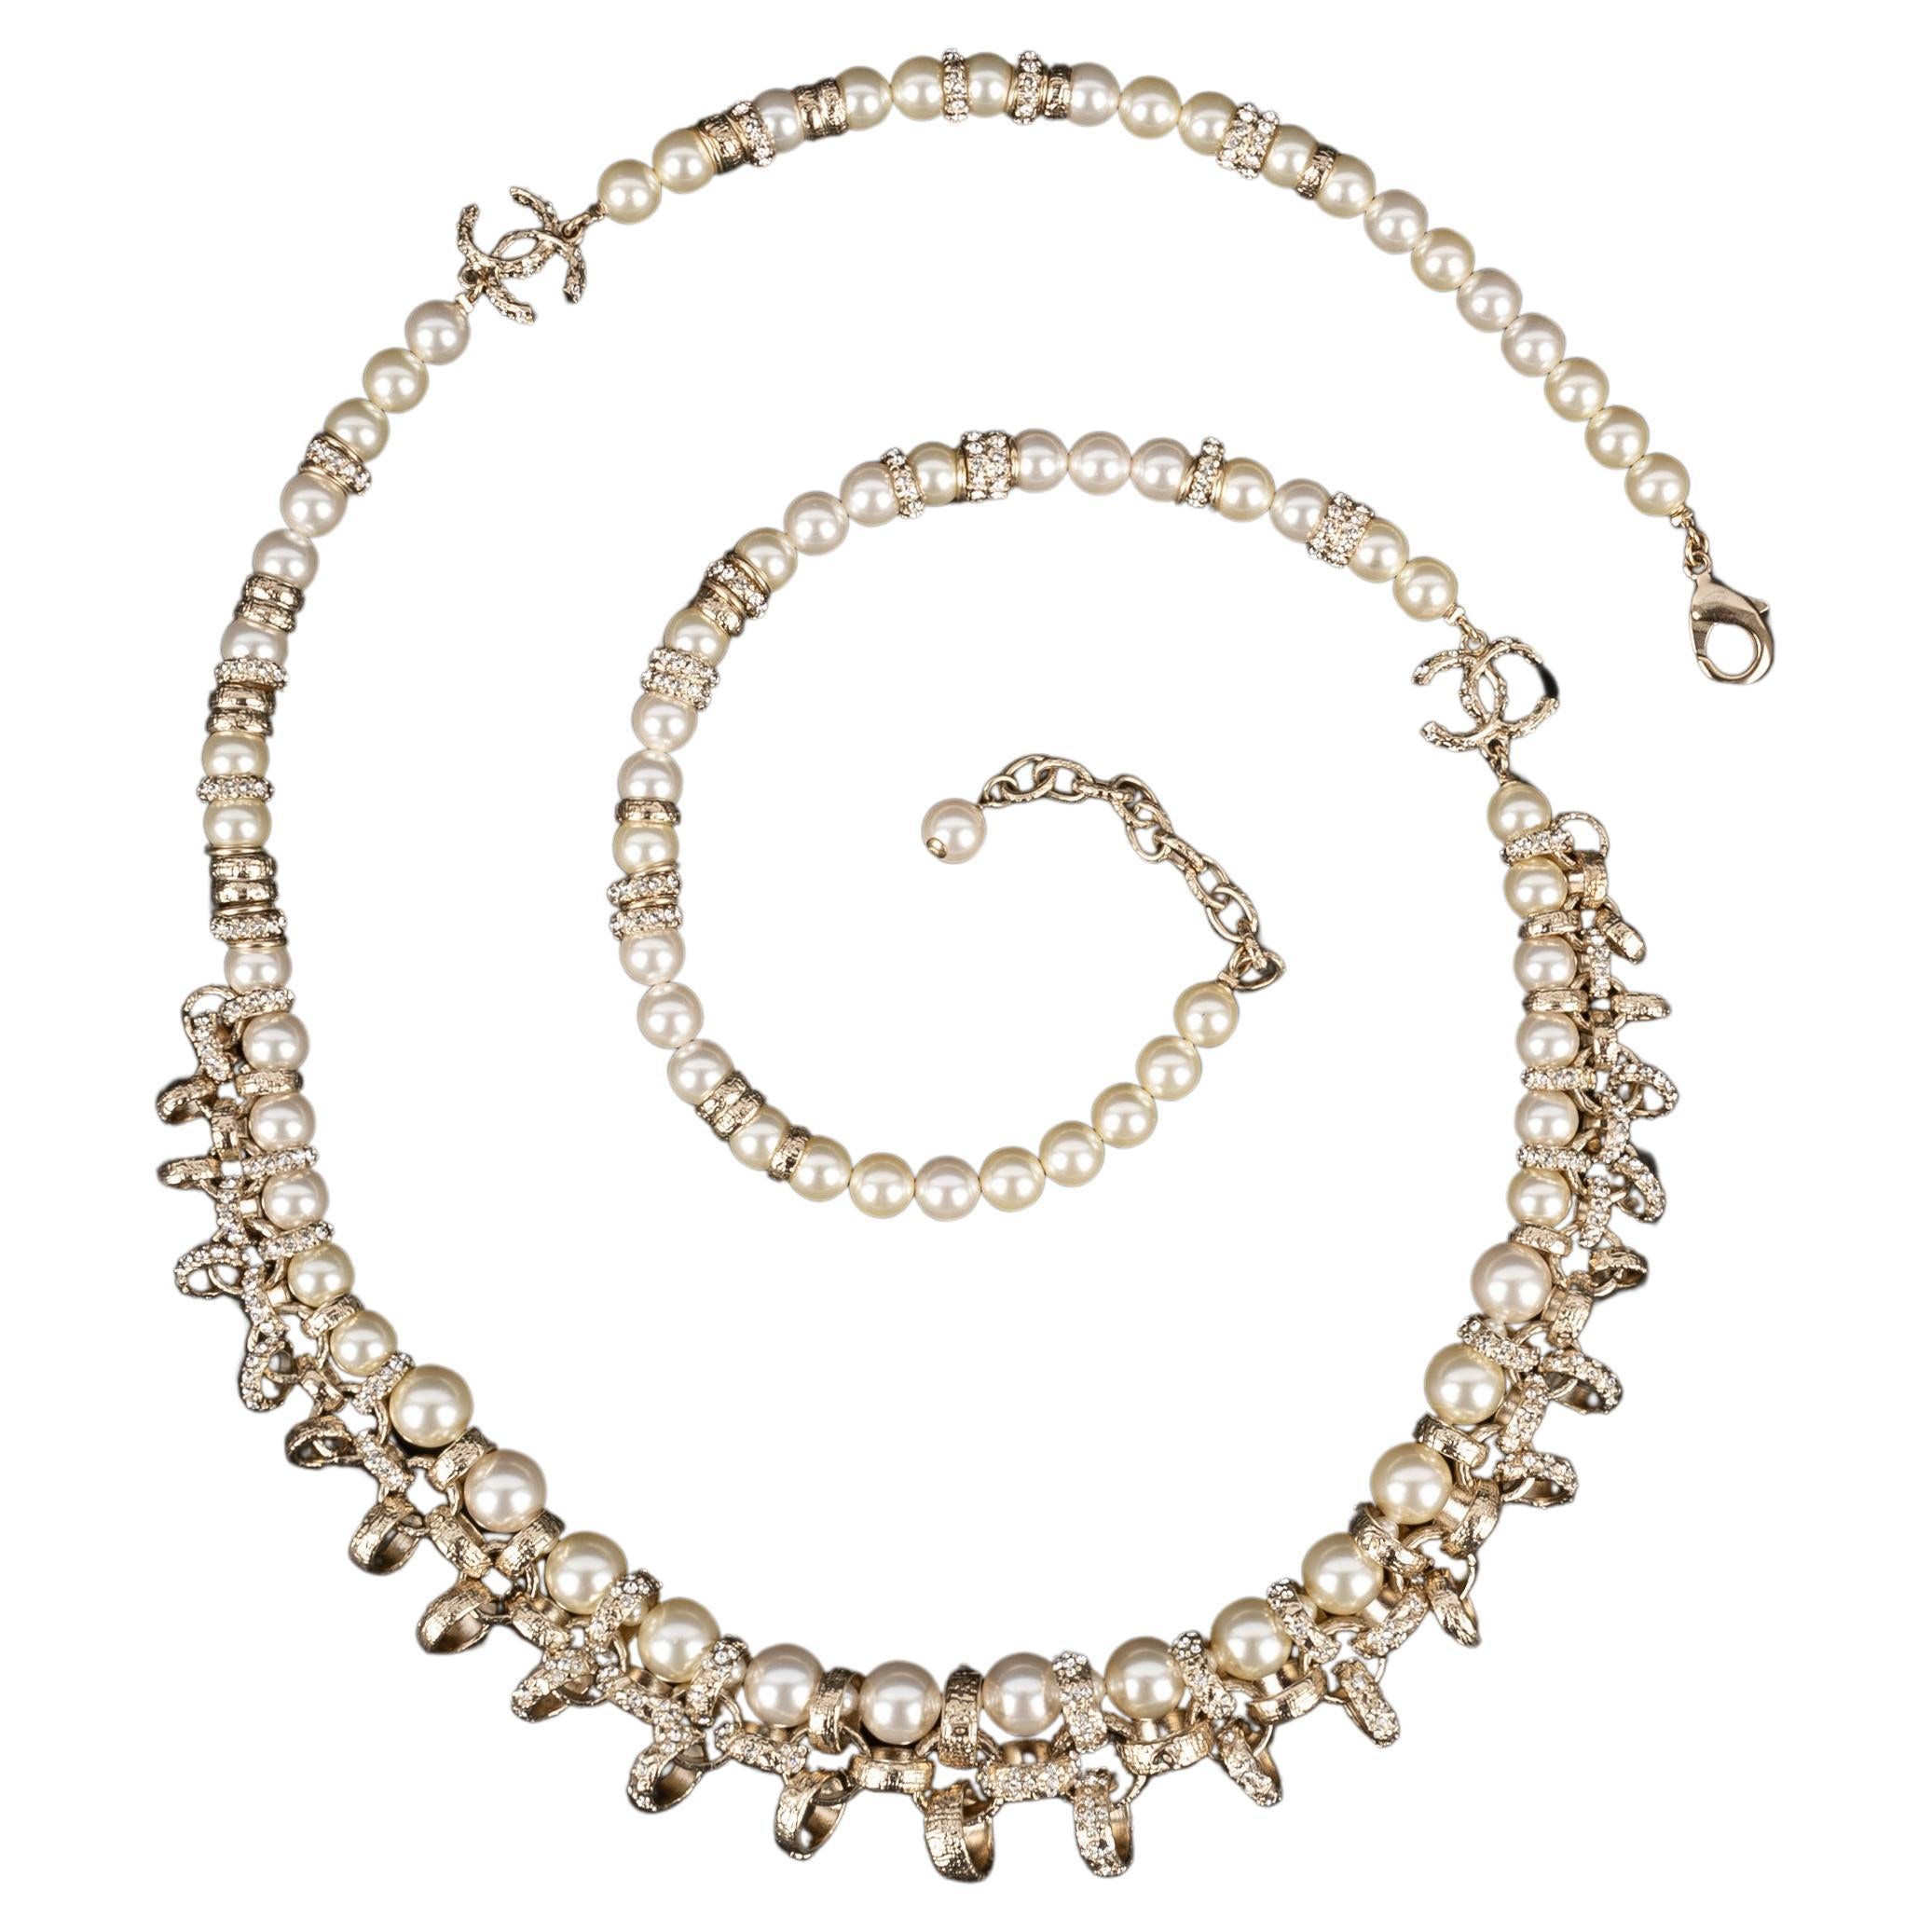 Chanel necklace 2016